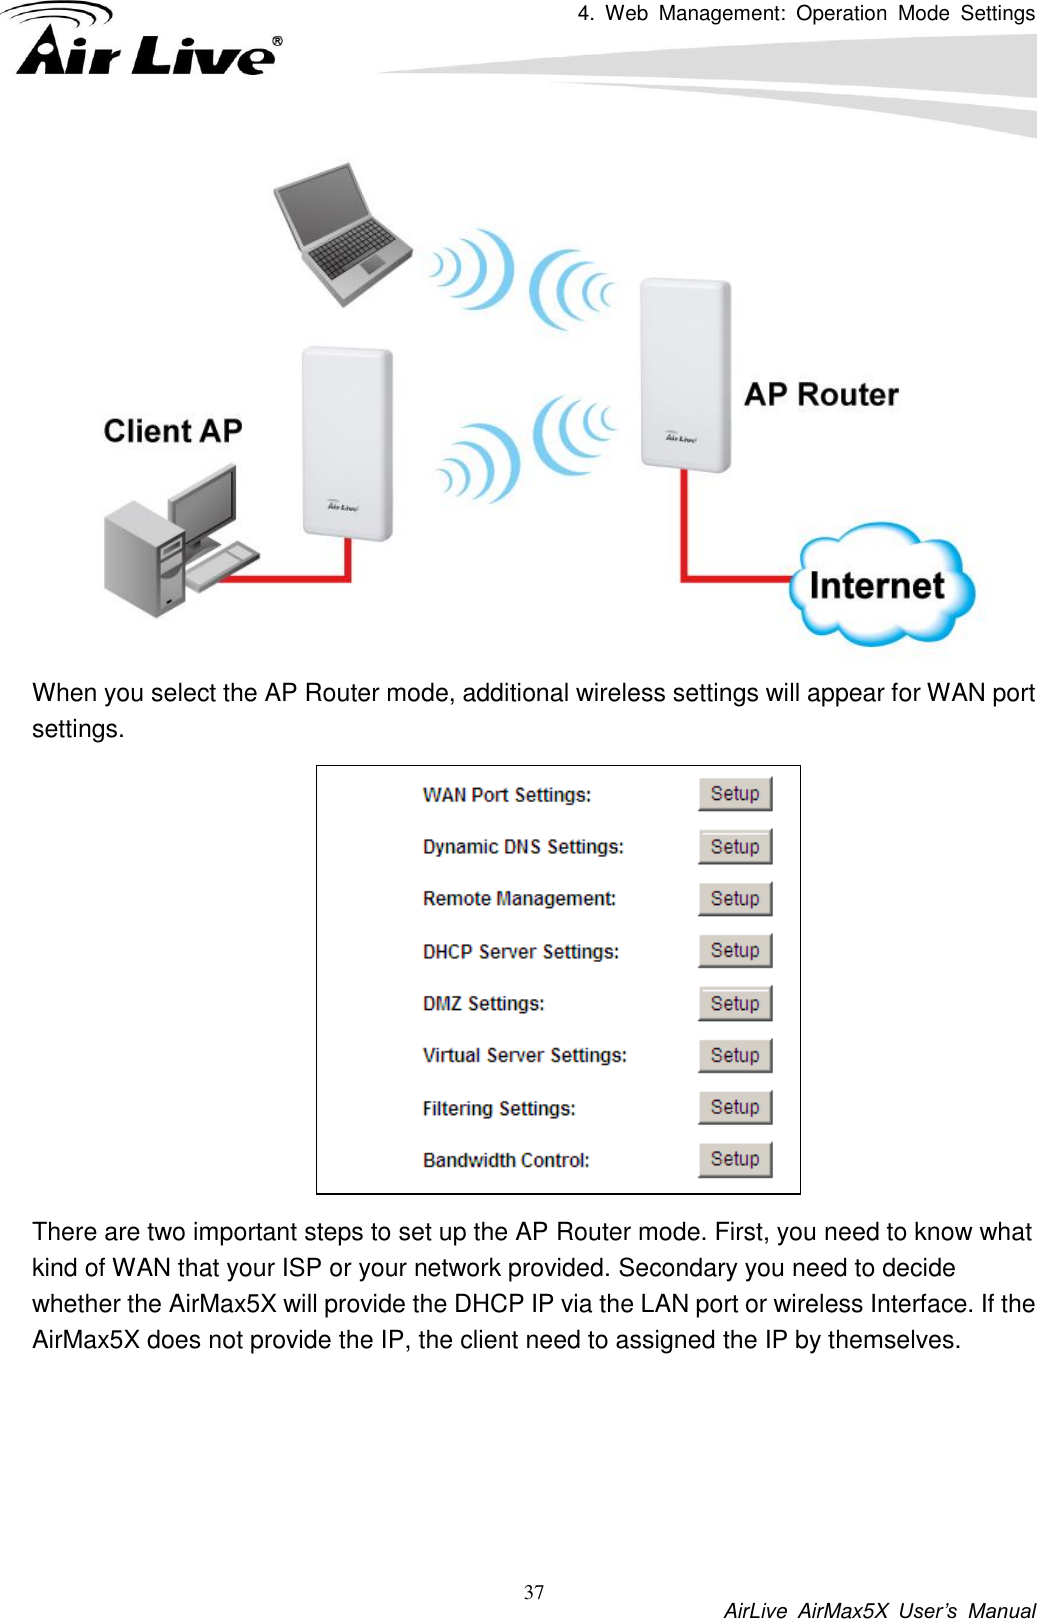 4.  Web  Management:  Operation  Mode  Settings           AirLive  AirMax5X  User’s  Manual 37  When you select the AP Router mode, additional wireless settings will appear for WAN port settings.  There are two important steps to set up the AP Router mode. First, you need to know what kind of WAN that your ISP or your network provided. Secondary you need to decide whether the AirMax5X will provide the DHCP IP via the LAN port or wireless Interface. If the AirMax5X does not provide the IP, the client need to assigned the IP by themselves.      